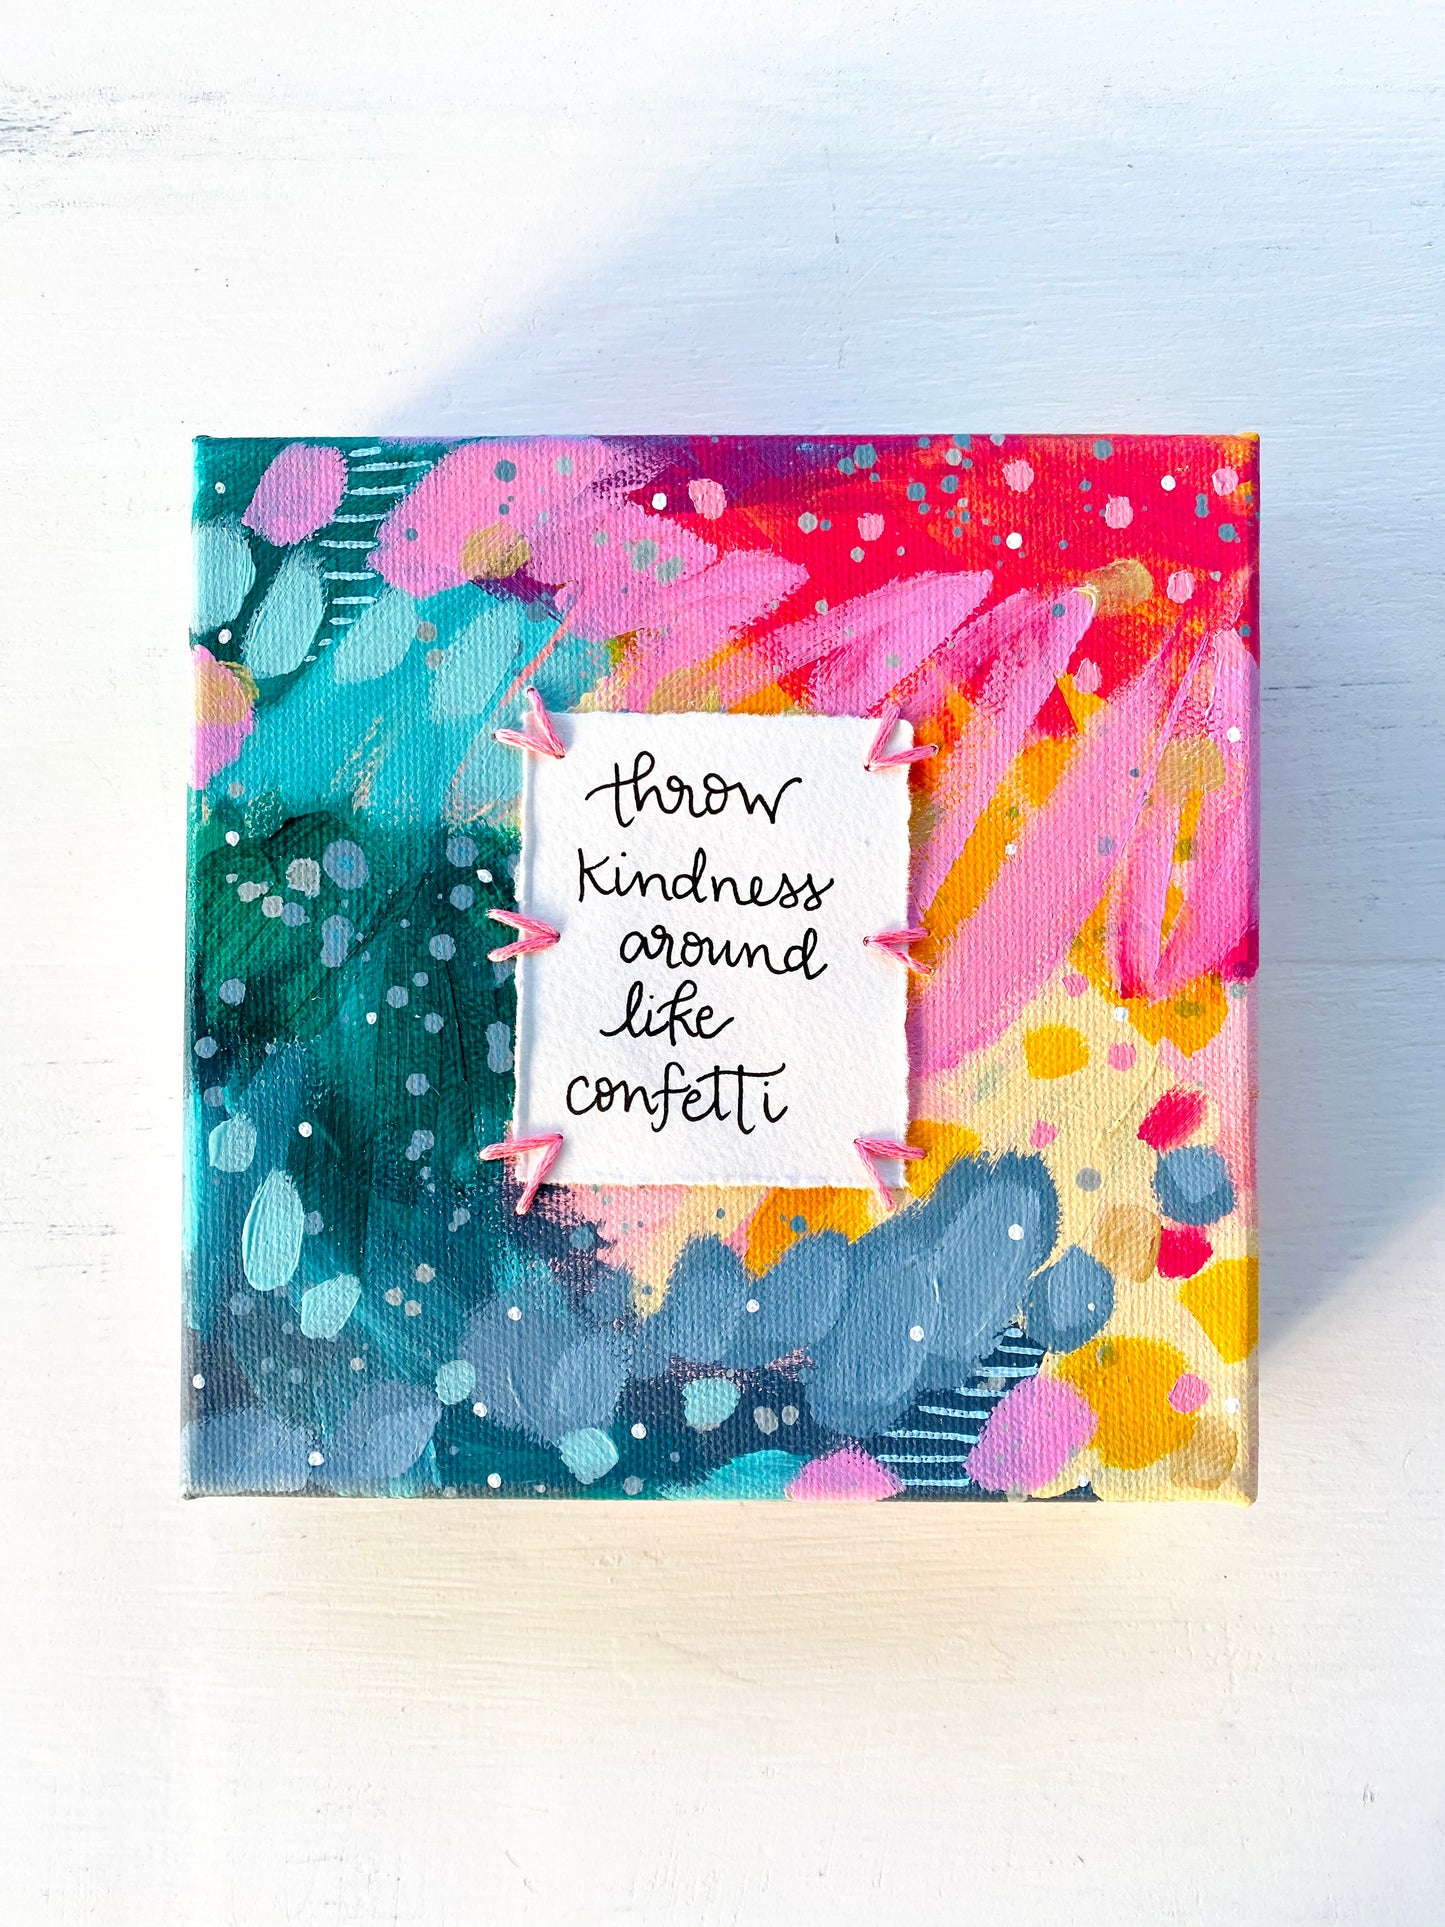 Confetti Kindness 6x6 inch original abstract canvas with embroidery thread accents